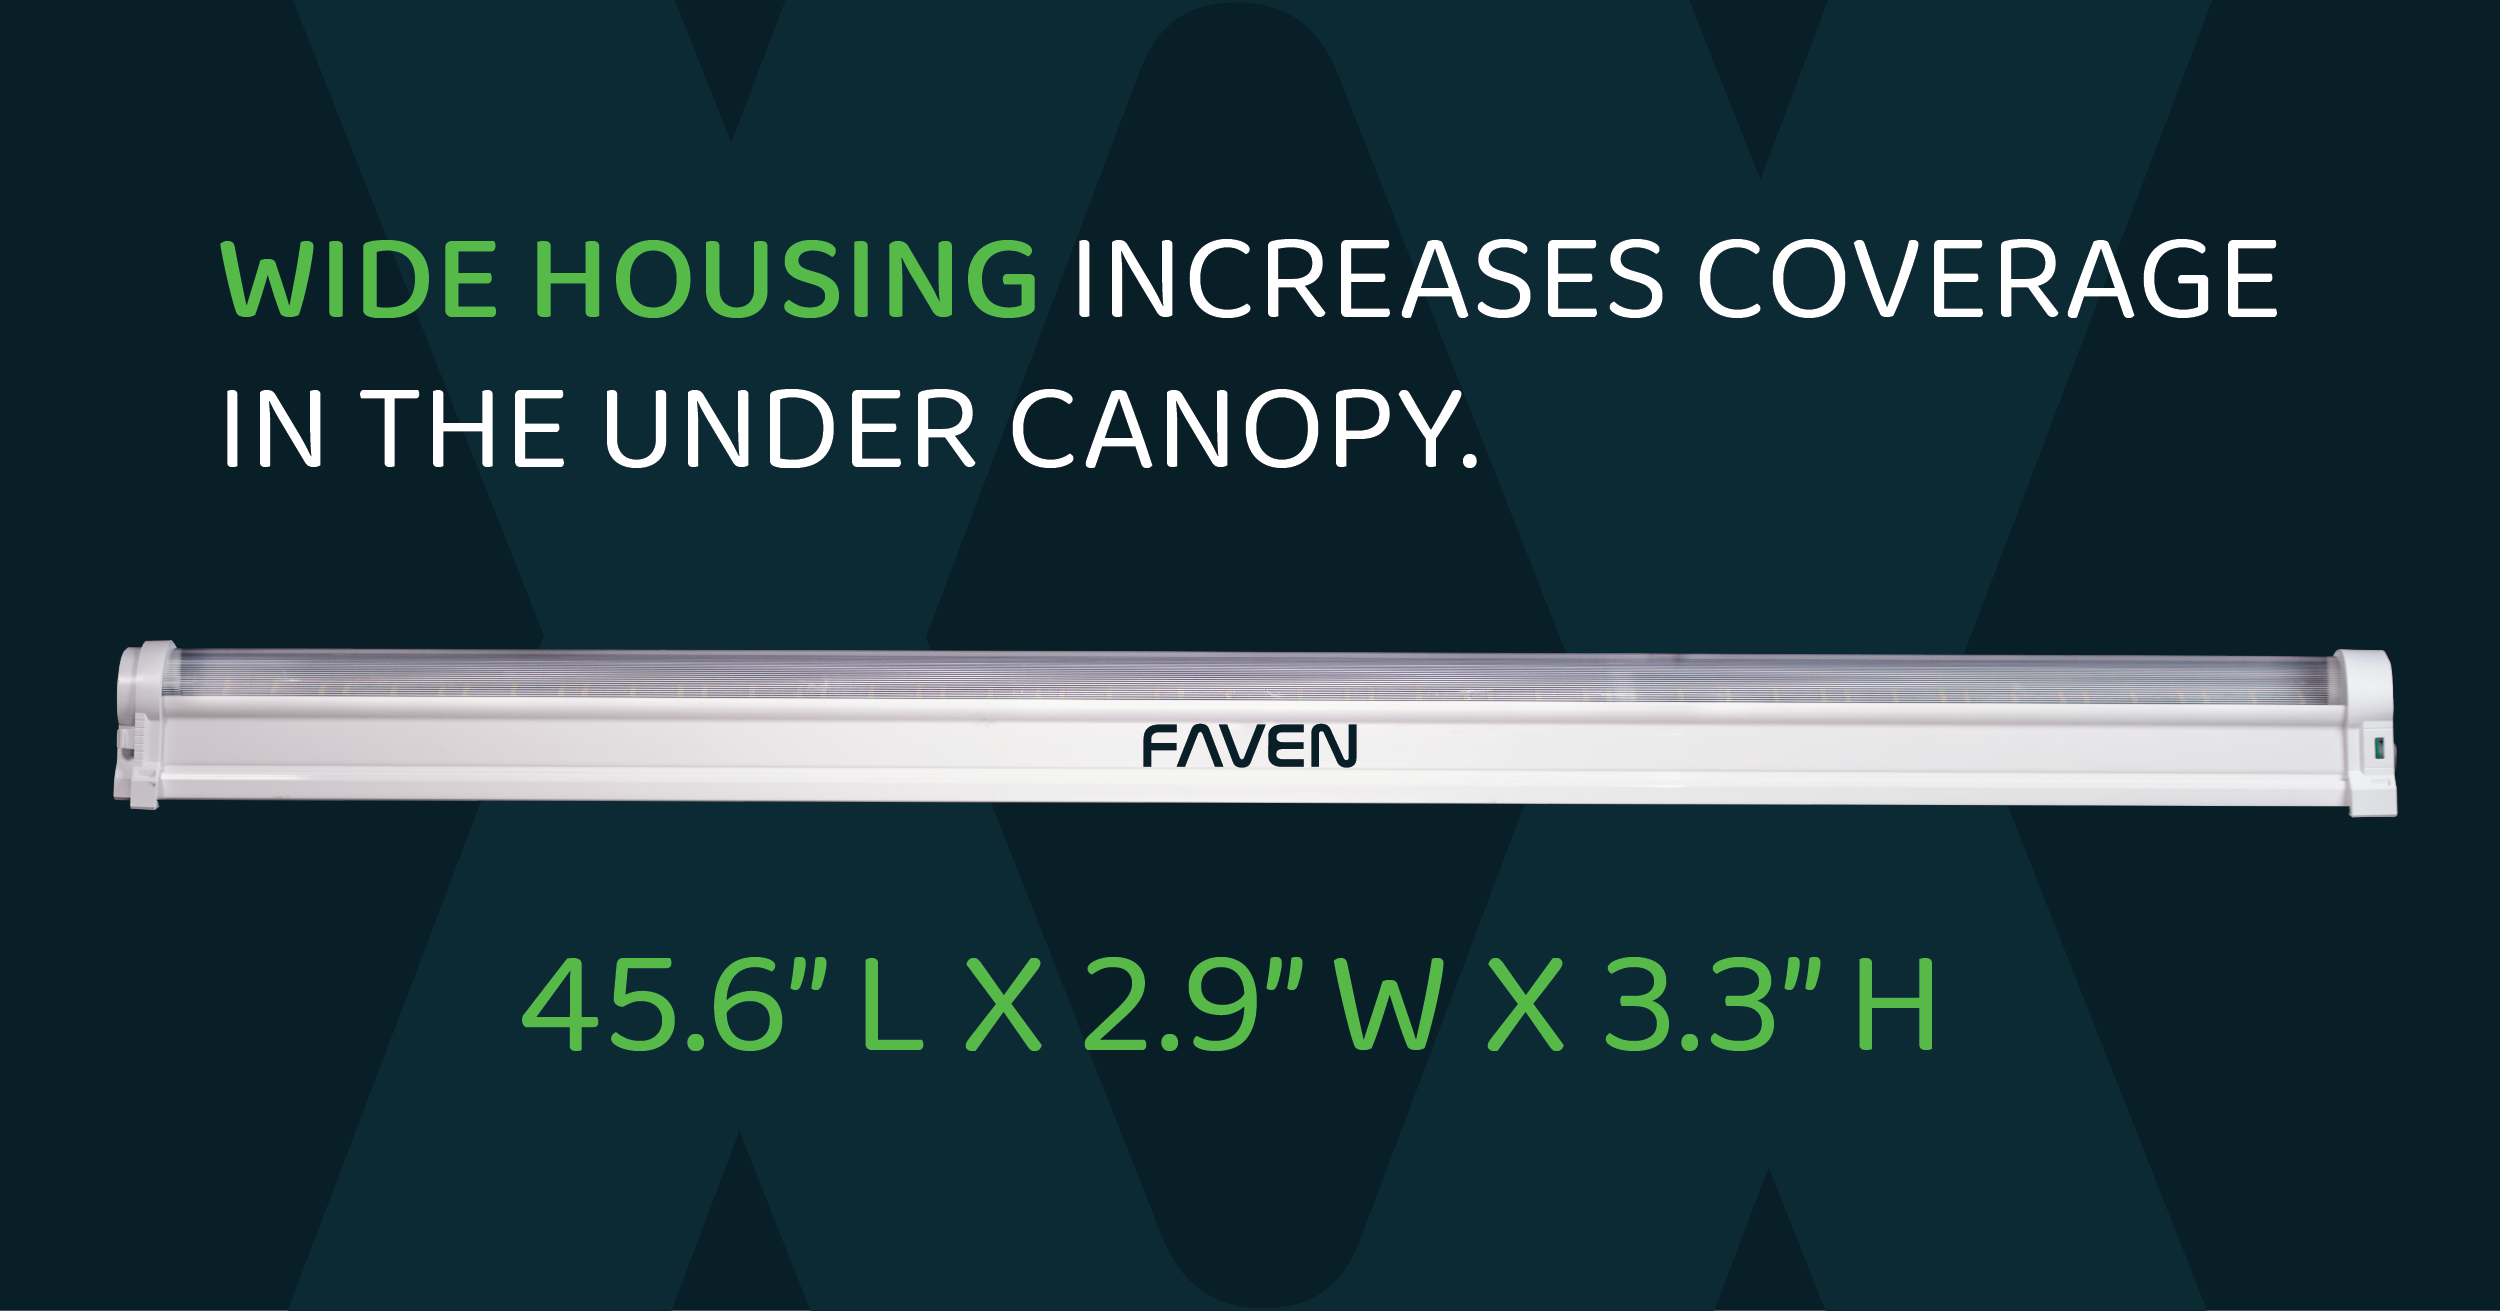 The length of Faven lights increases coverage of the under canopy. 